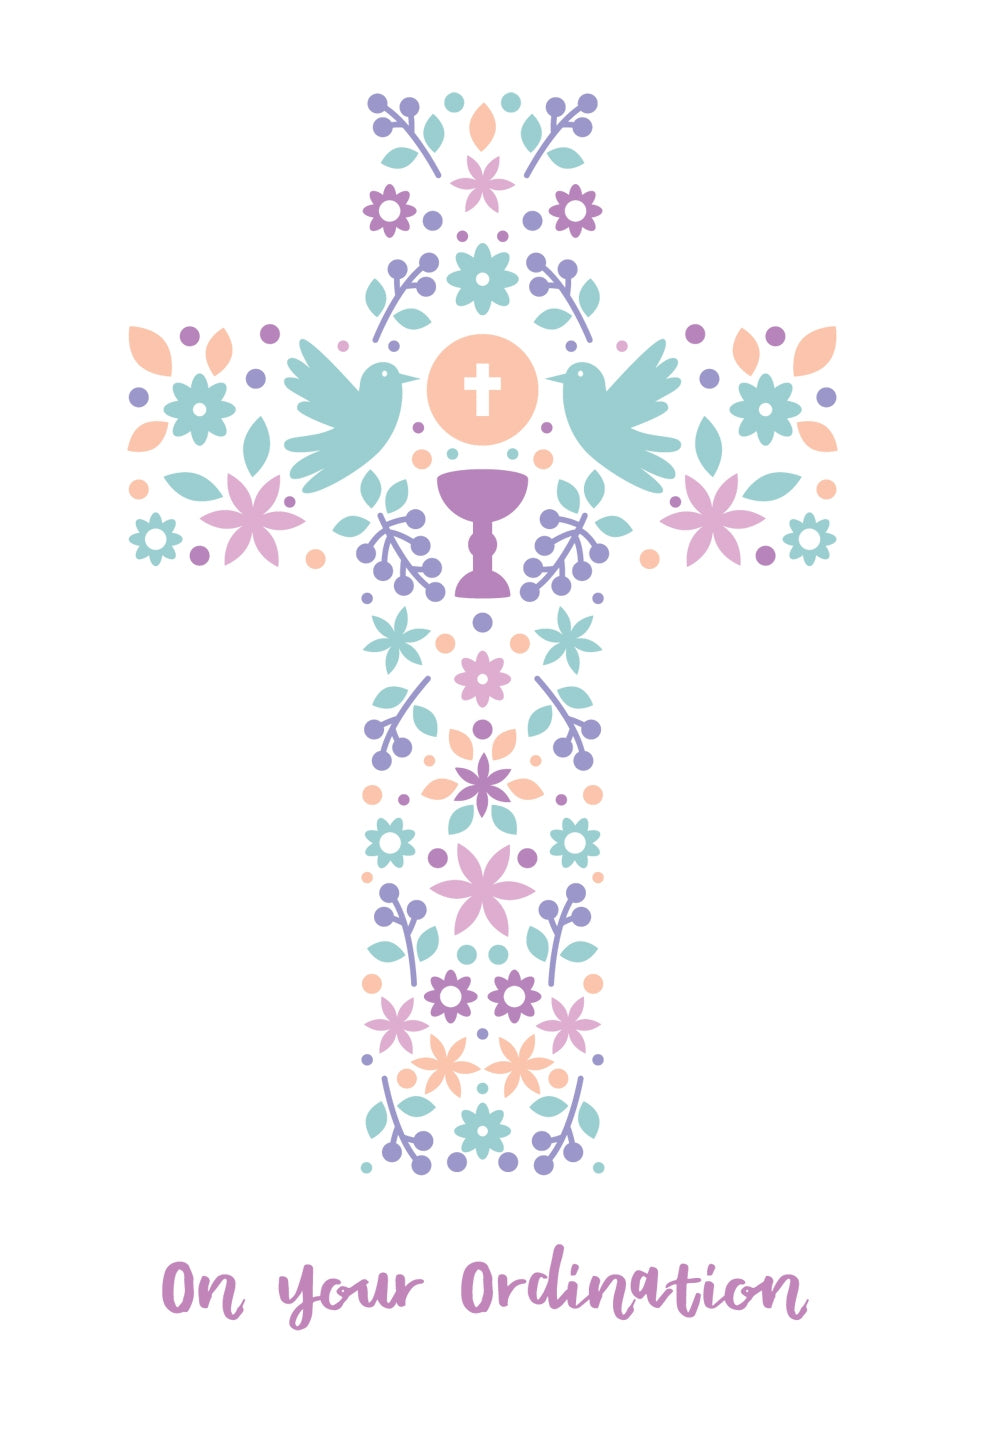 On Your Ordination - Flower Cross Std Card Gloss (6 Pack)On Your Ordination - Flower Cross Std Card Gloss (6 Pack)